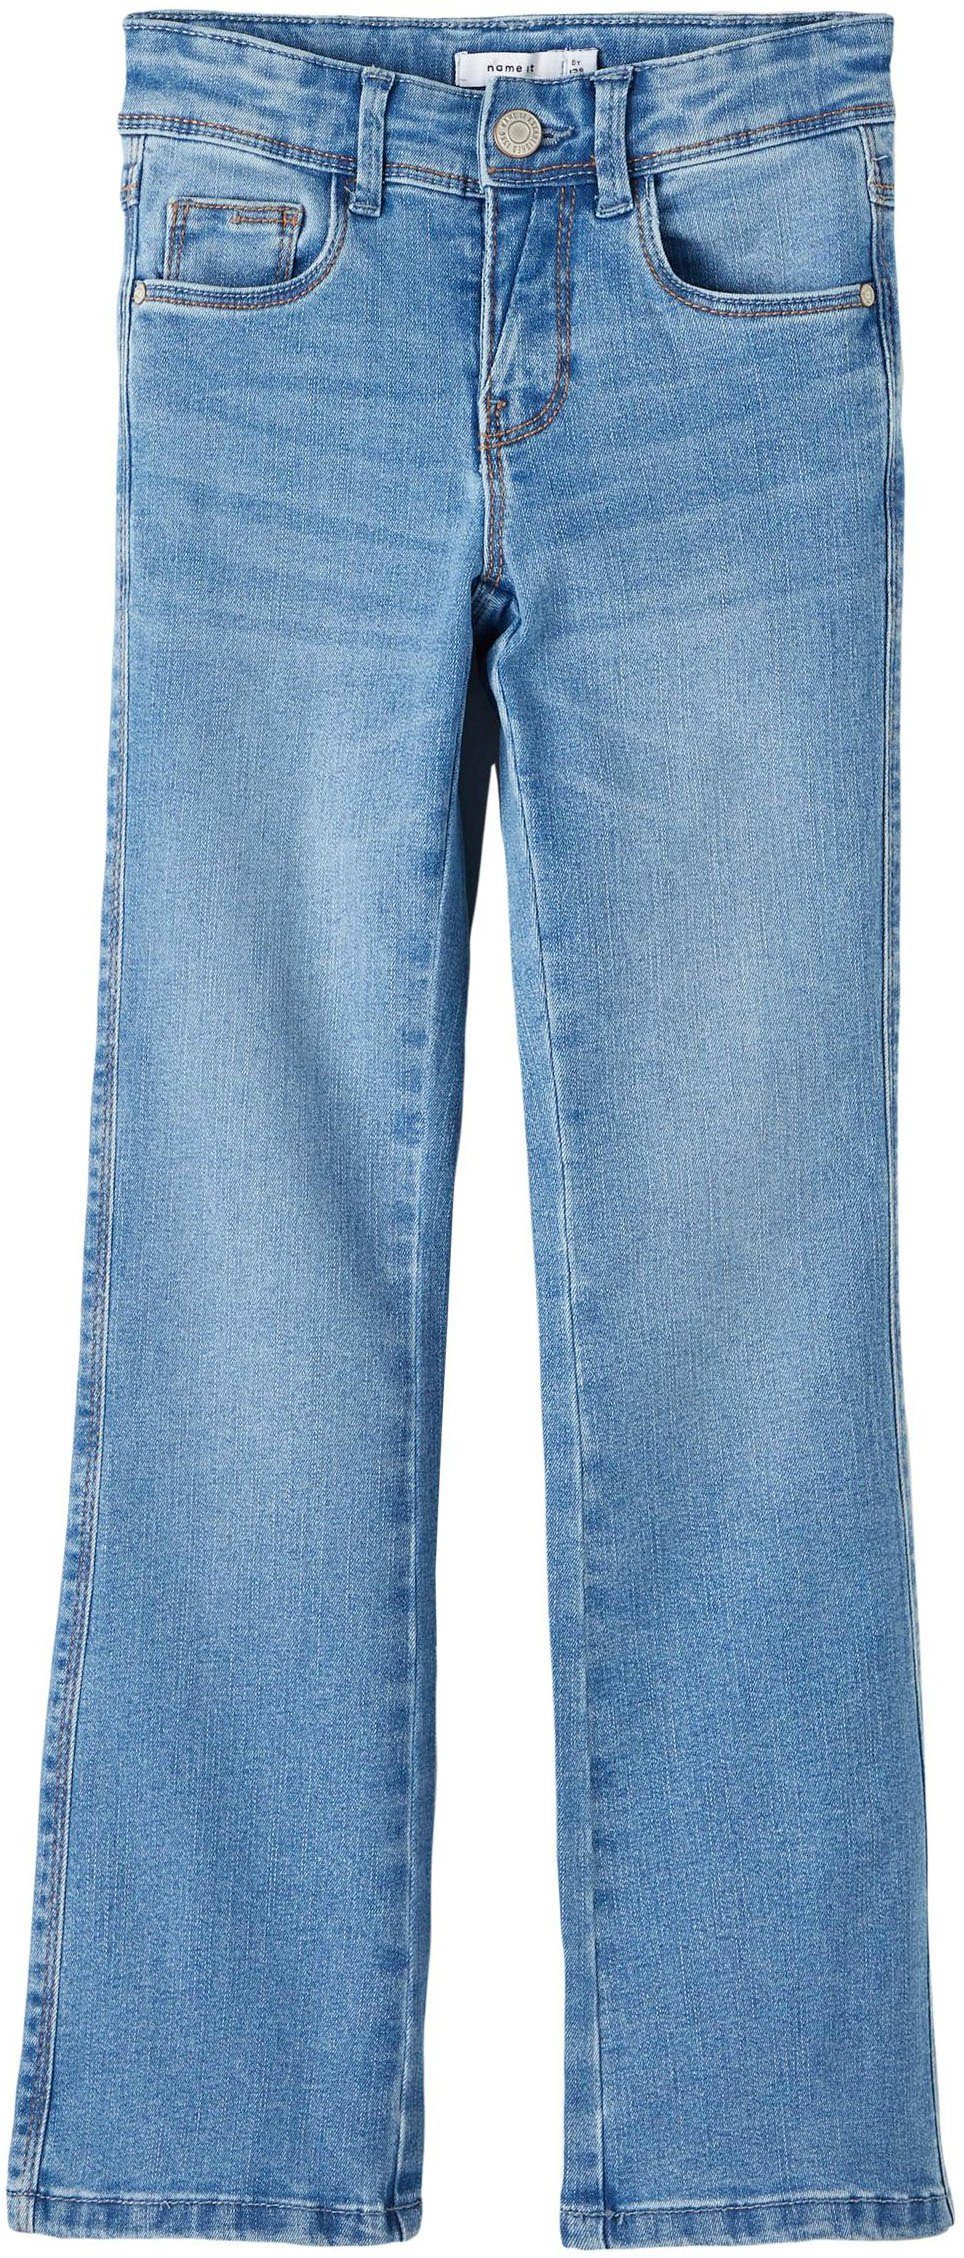 blue mit medium Bootcut-Jeans Name NKFPOLLY Stretch SKINNY BOOT NOOS JEANS 1142-AU It